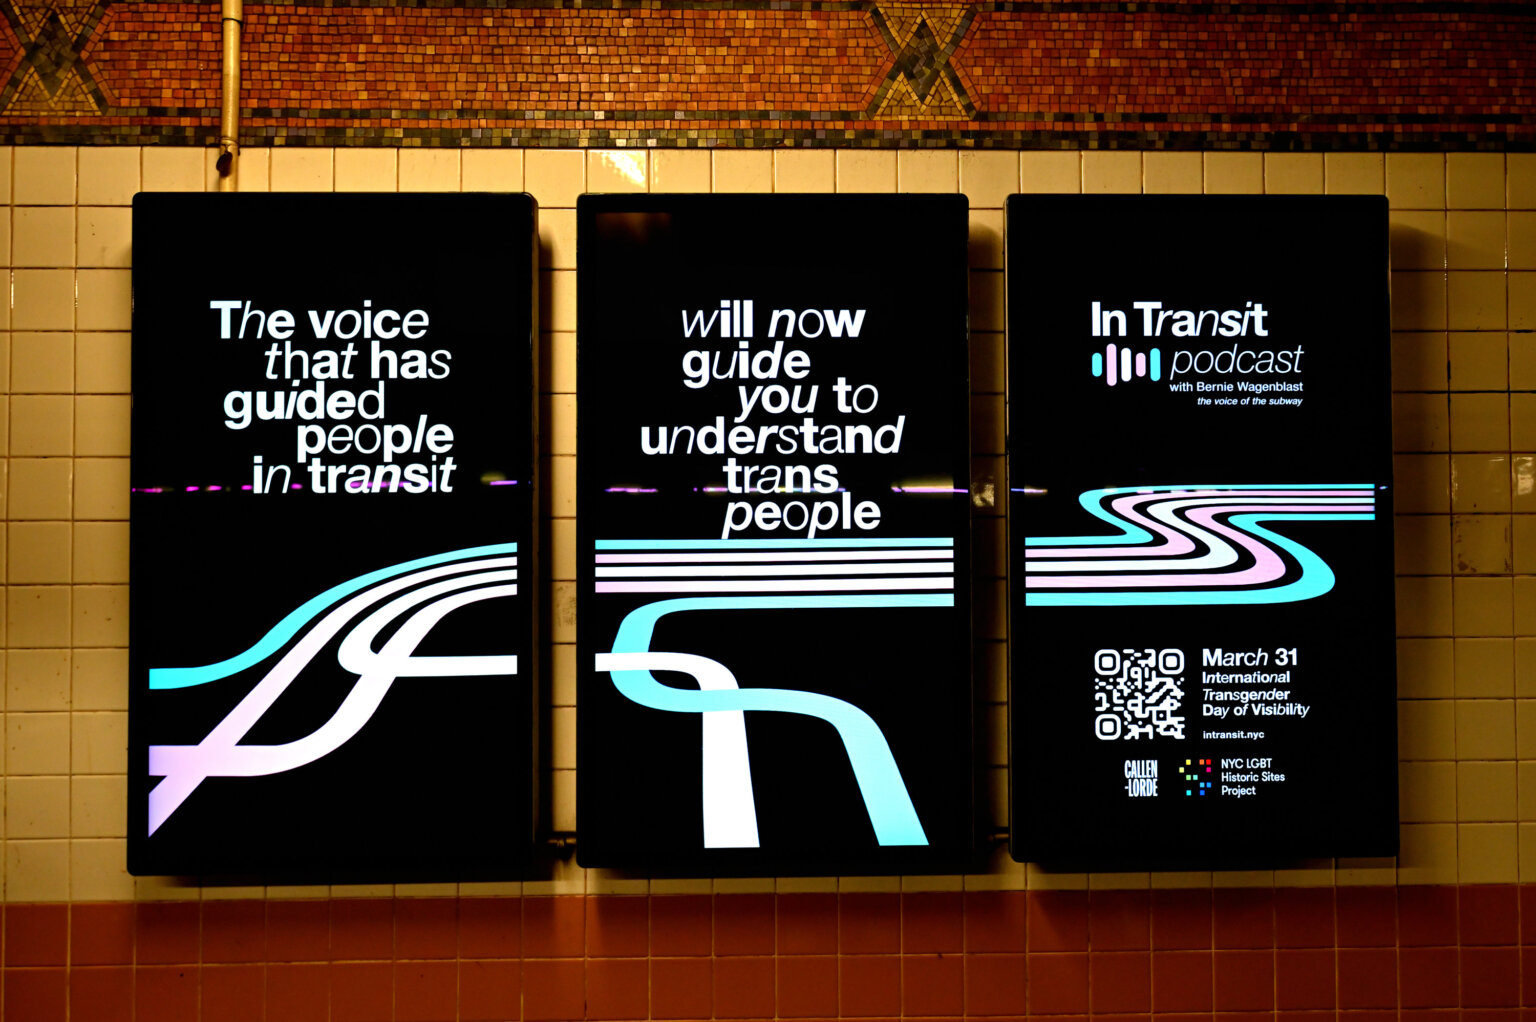 A set of digital billboards highlight the awareness campaign